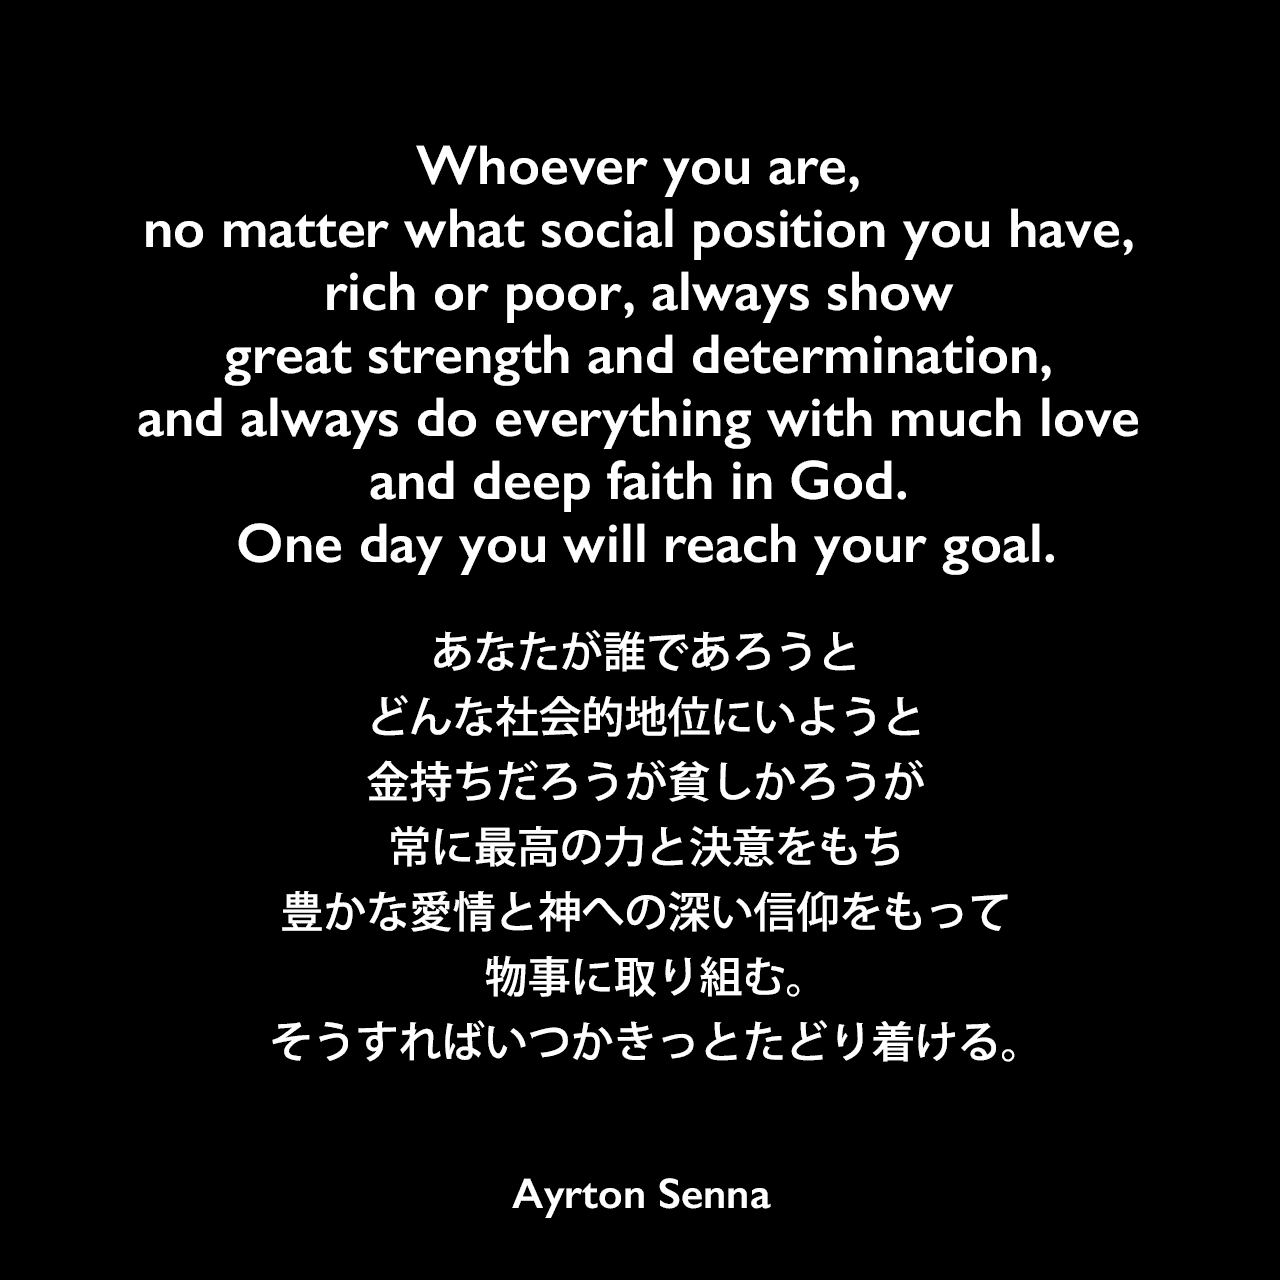 Whoever you are, no matter what social position you have, rich or poor, always show great strength and determination, and always do everything with much love and deep faith in God. One day you will reach your goal.あなたが誰であろうと、どんな社会的地位にいようと、金持ちだろうが貧しかろうが、常に最高の力と決意をもち、豊かな愛情と神への深い信仰をもって物事に取り組む。そうすればいつかきっとたどり着ける。